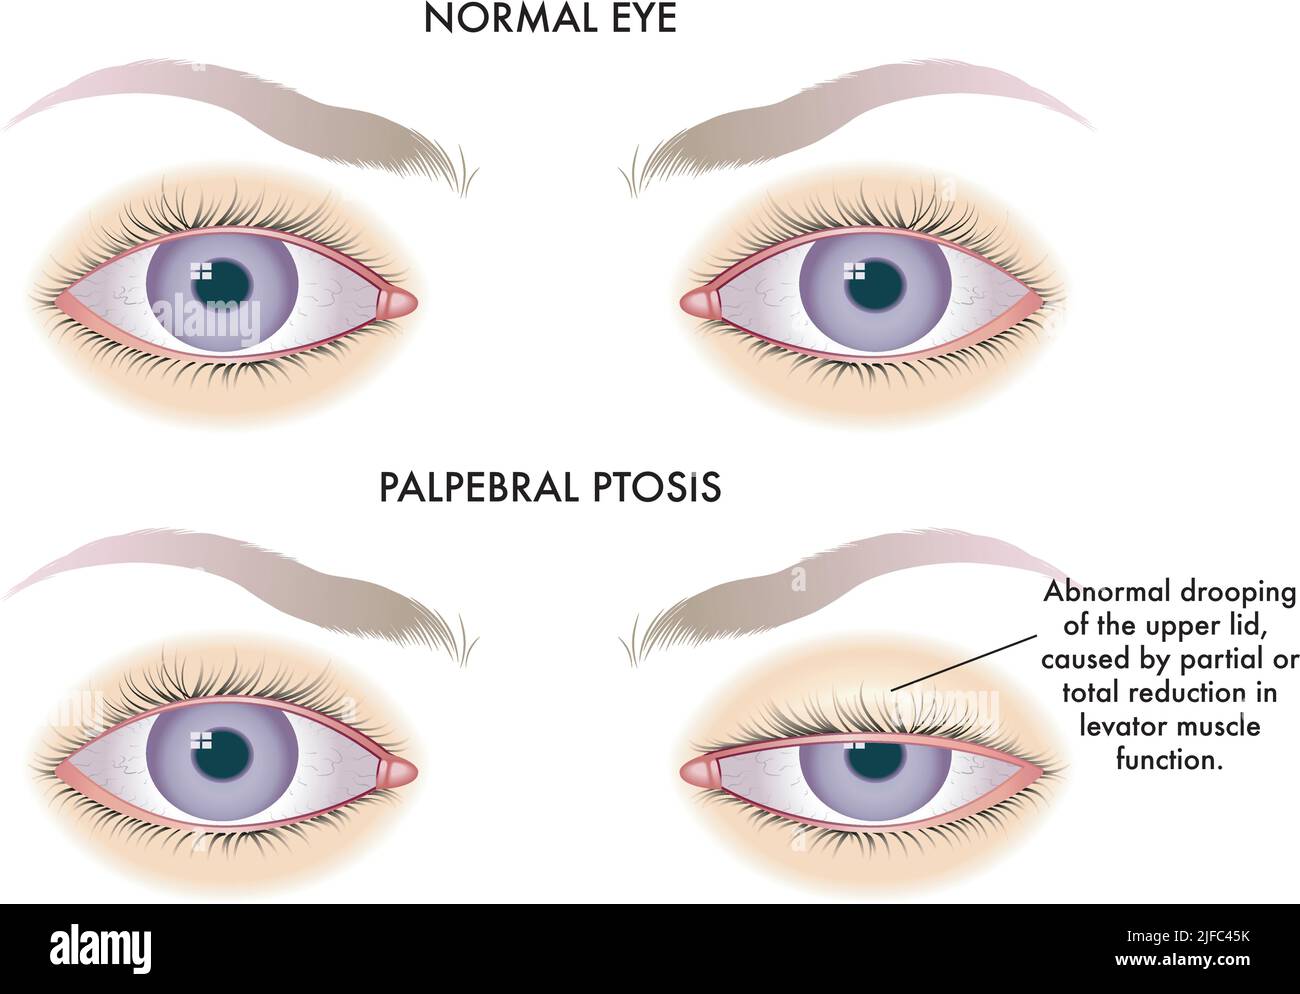 Medical illustration shows the comparison between a normal eye and one affected by palpebral ptosis. Stock Vector